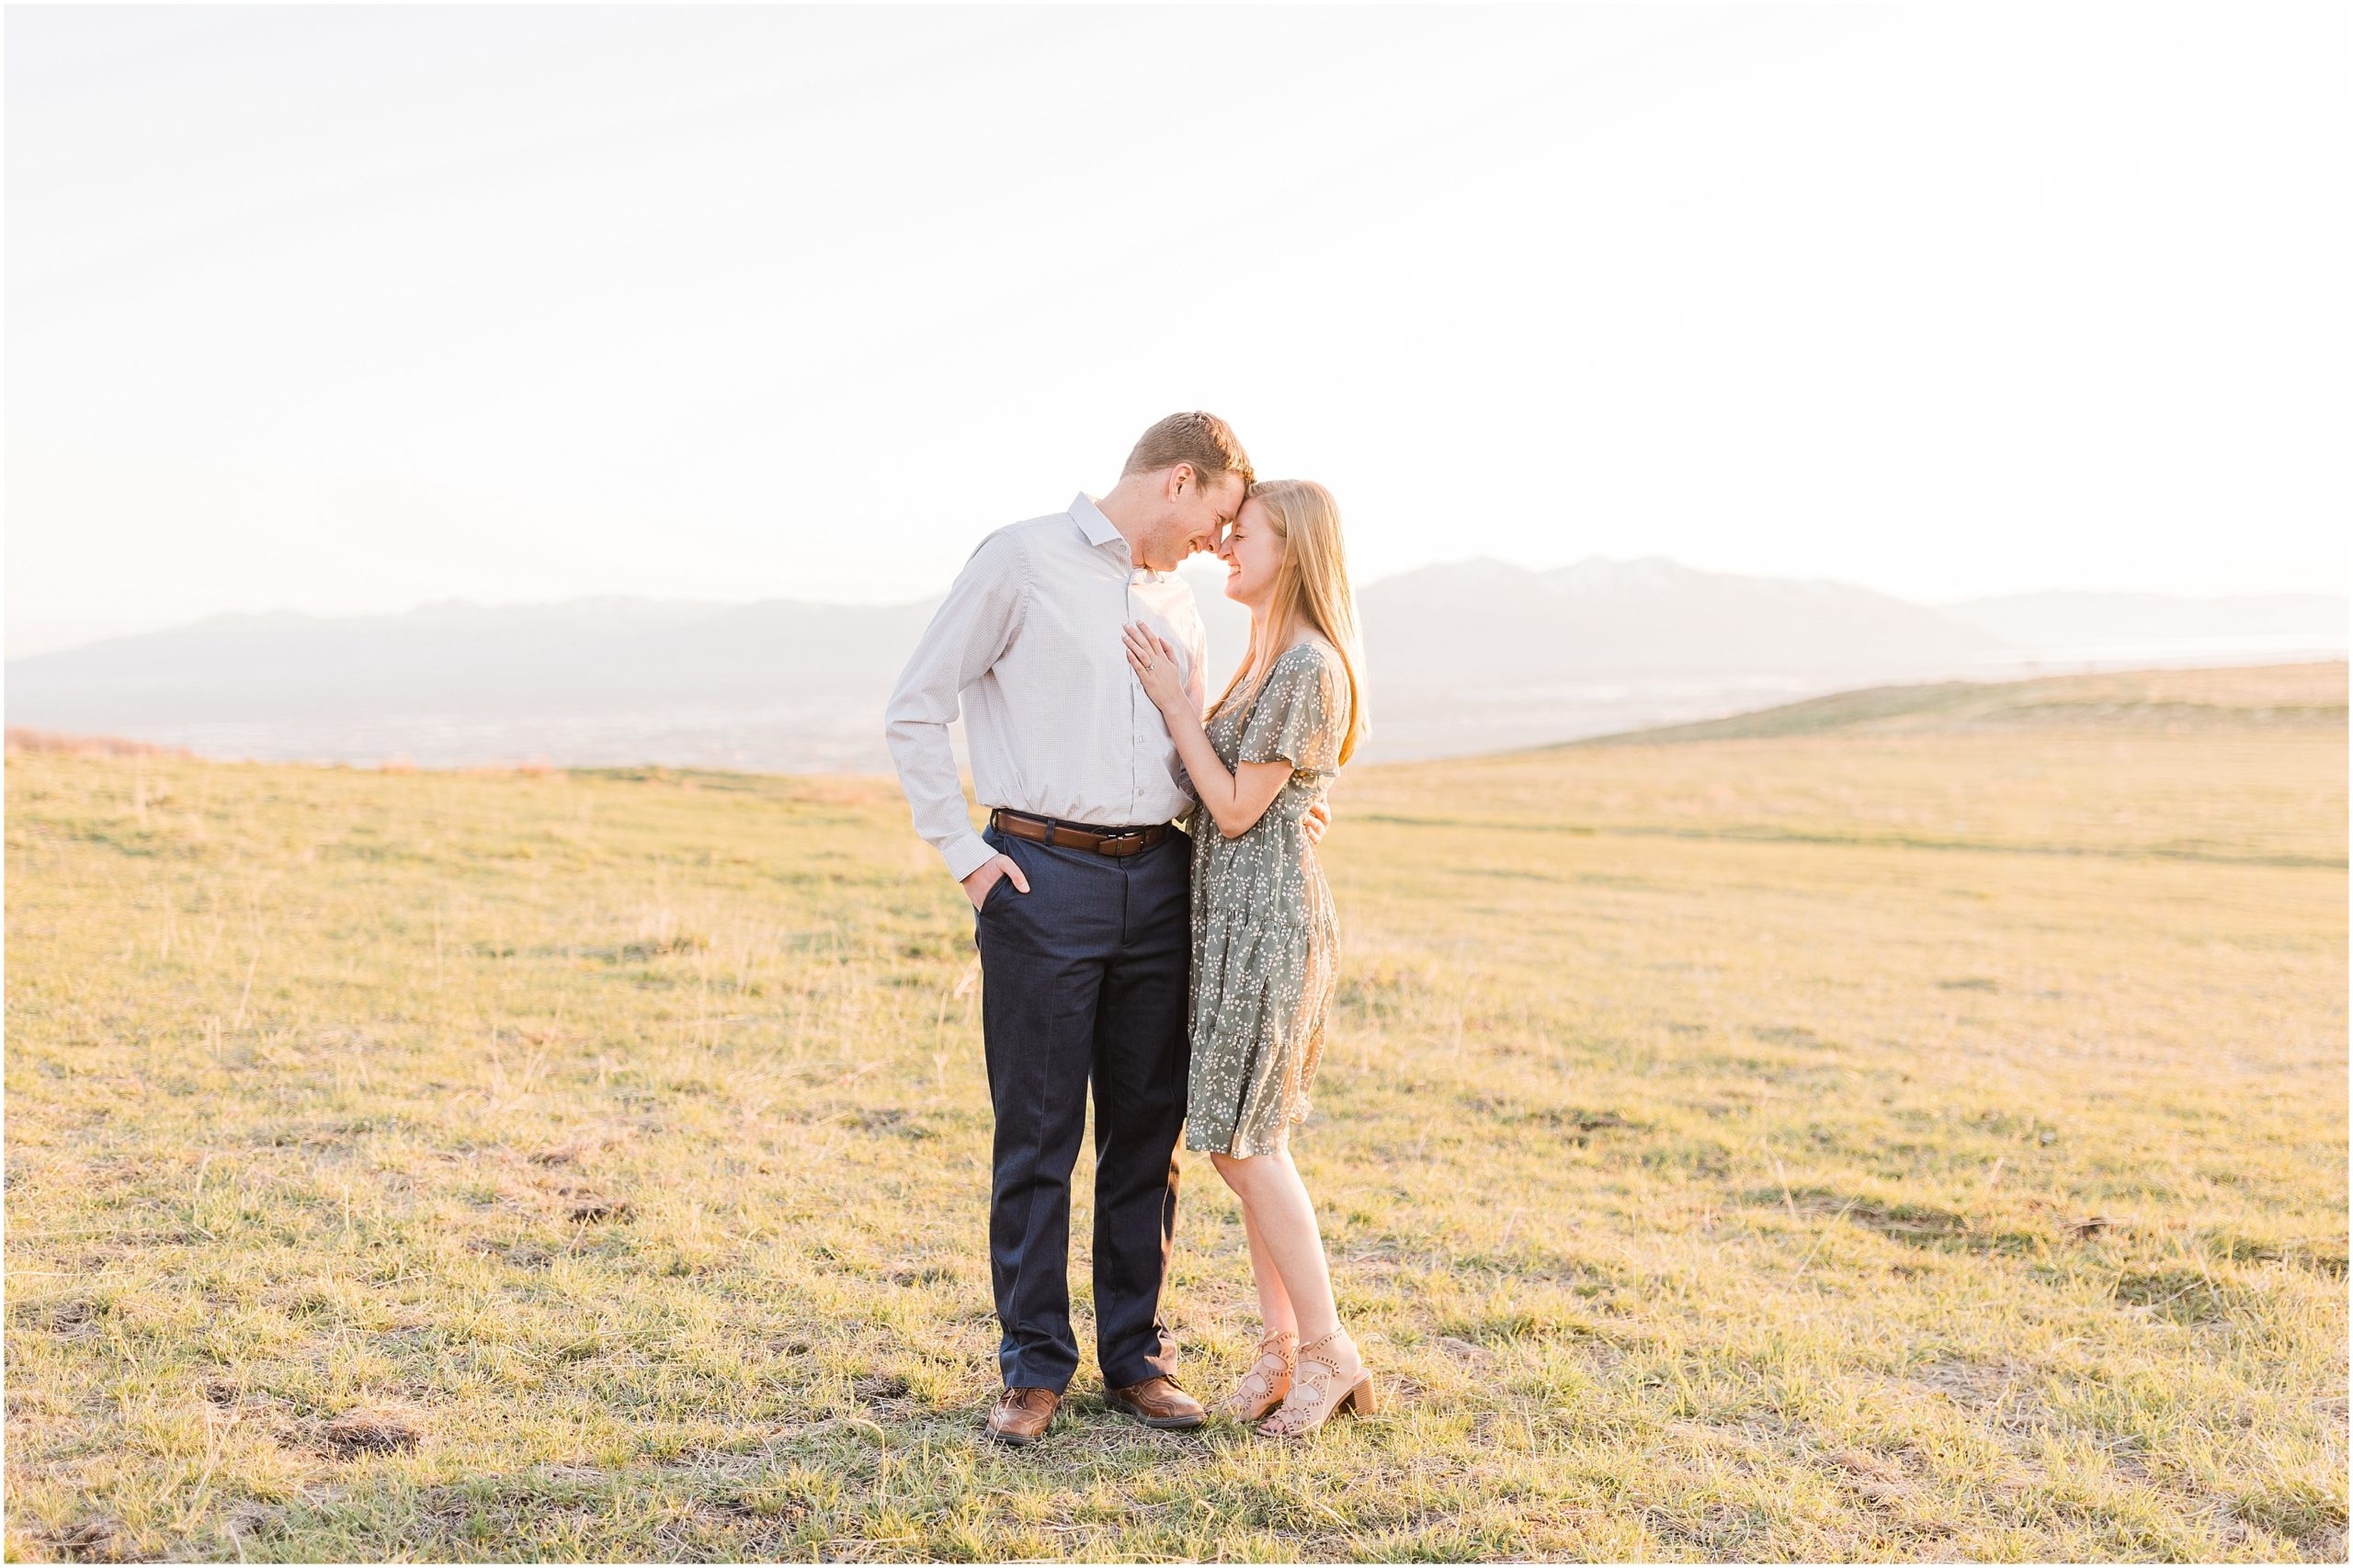 Prettiest Anniversary Photoshoot At Tunnel Springs Park